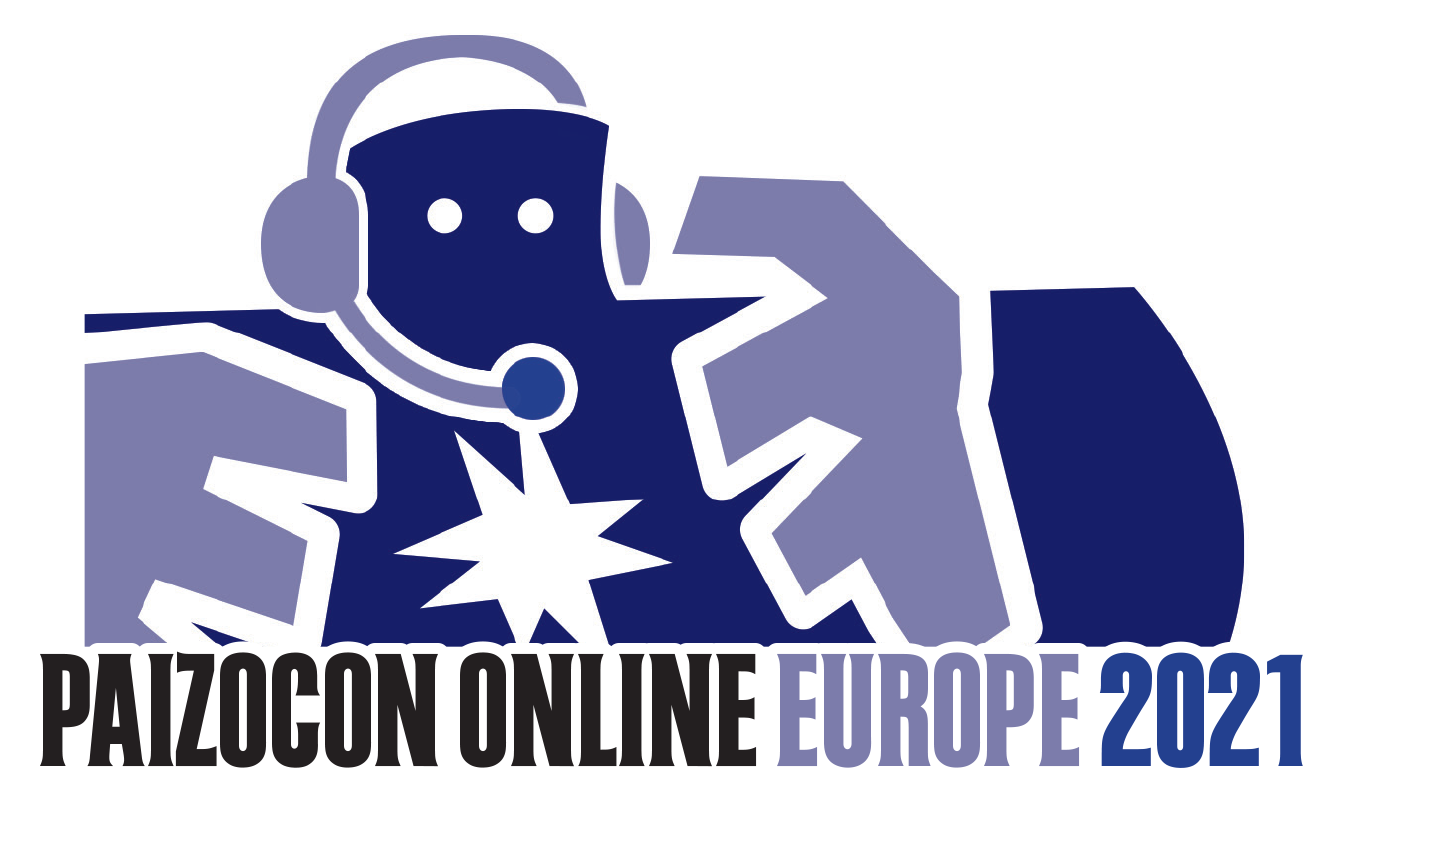 Paizo Golem Vigilant with a headset and mic over the paizocon online Europe 2021 text logo